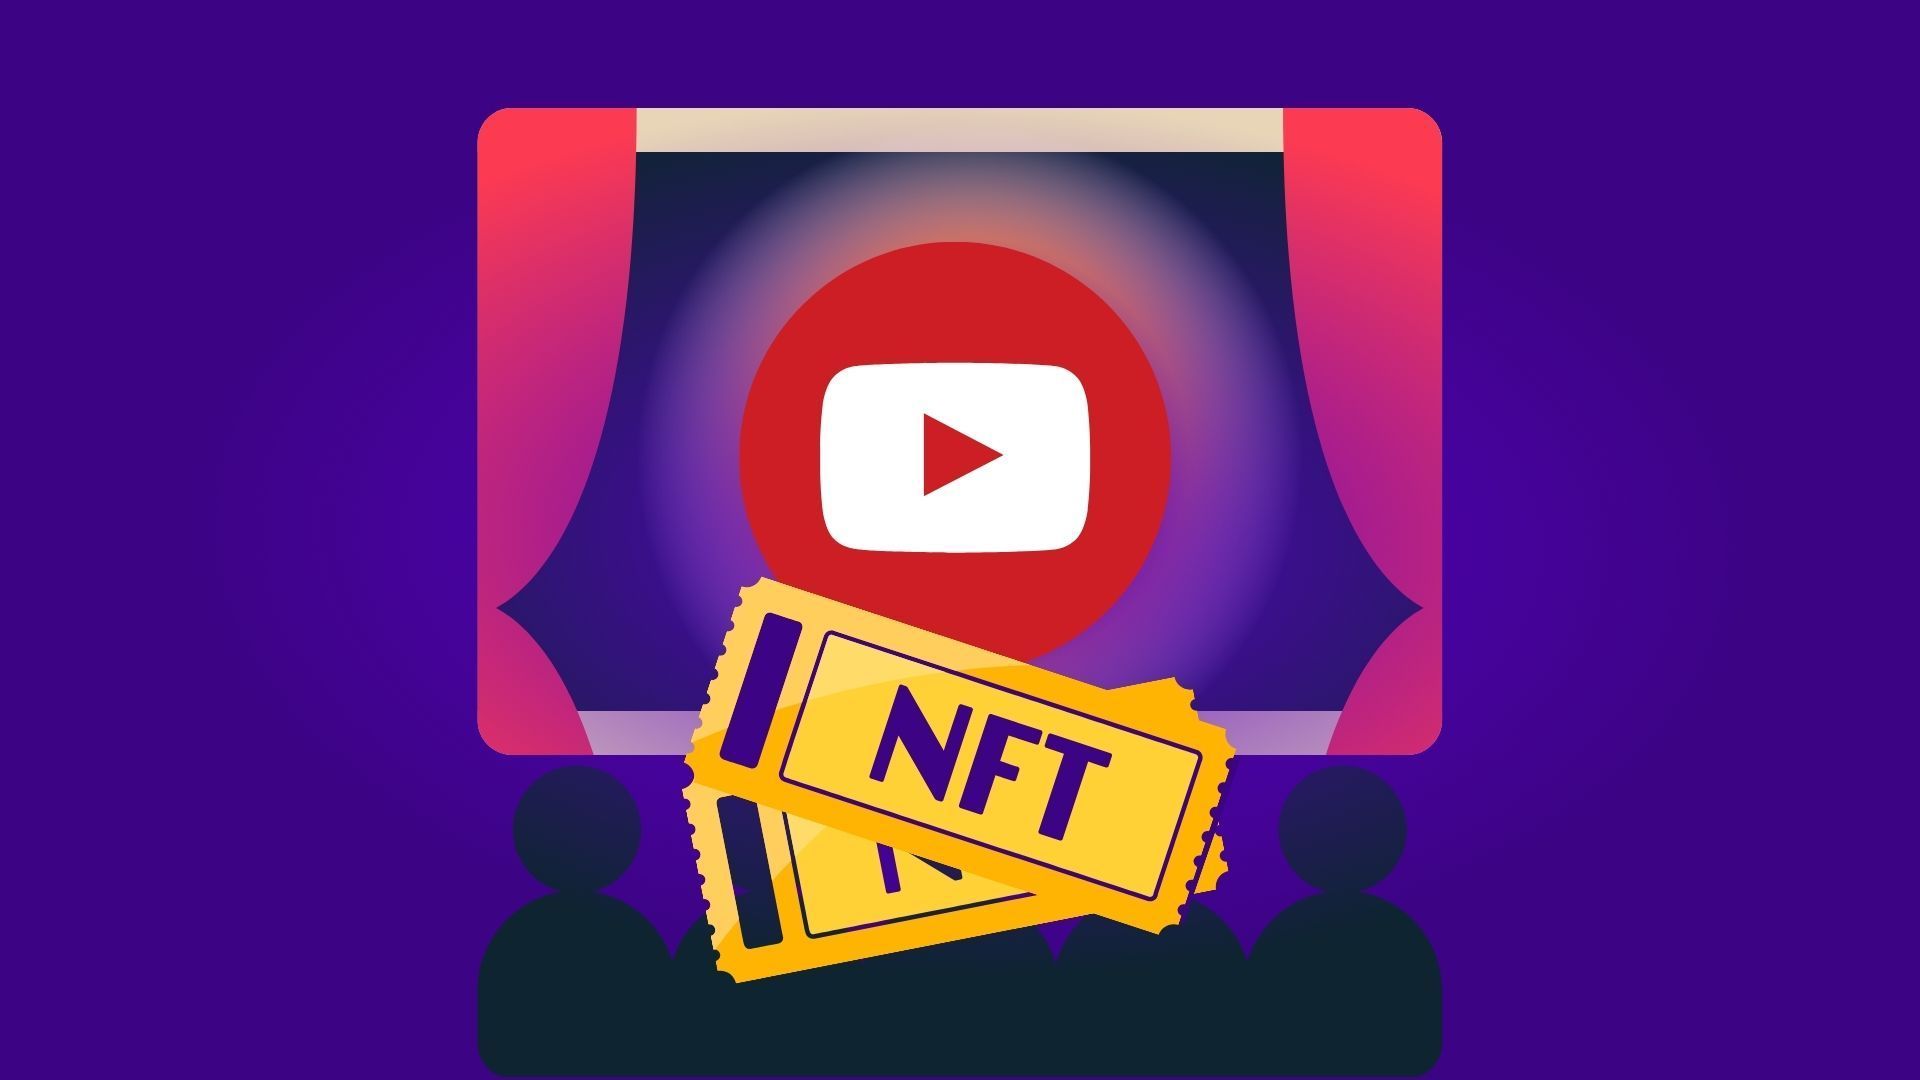 New Youtube CEO, nft